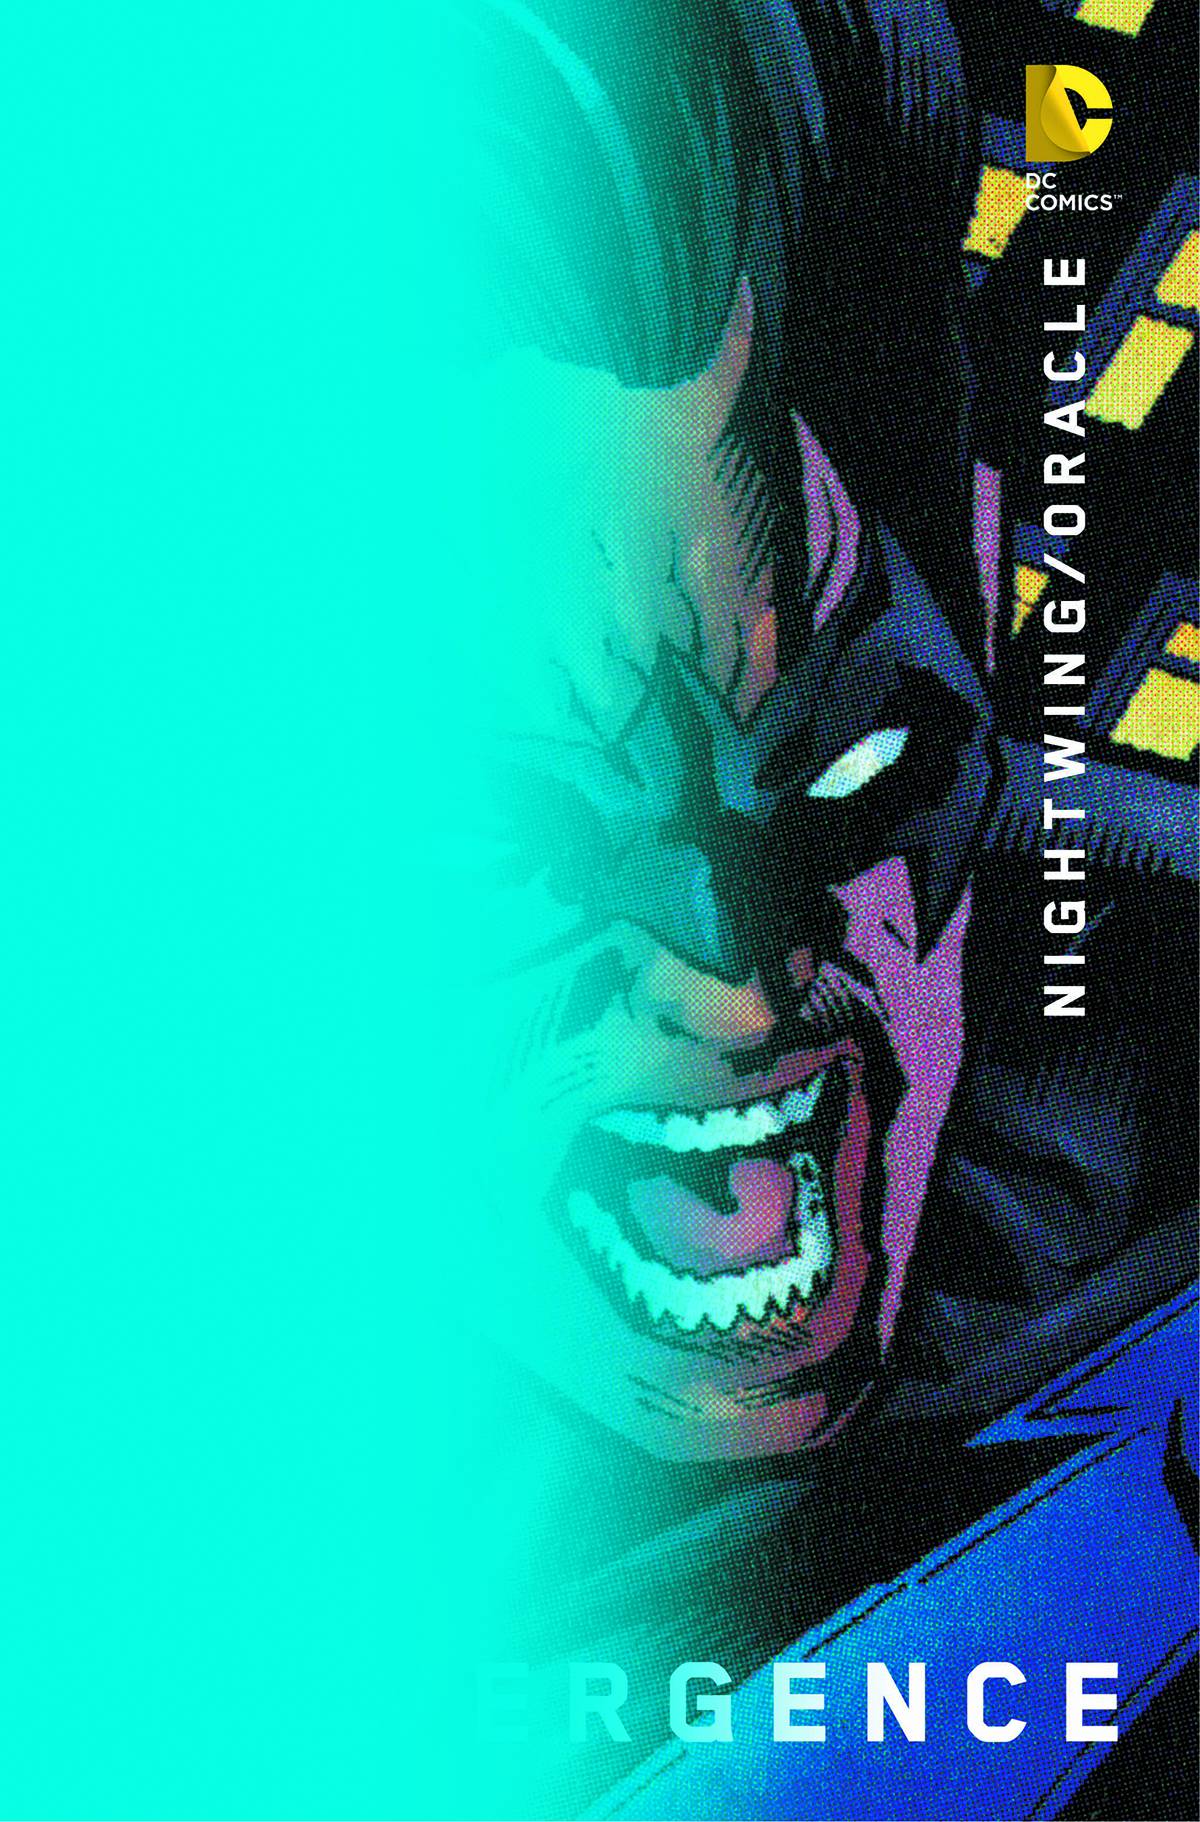 Convergence Nightwing Oracle #2 Chip Kidd Variant Edition